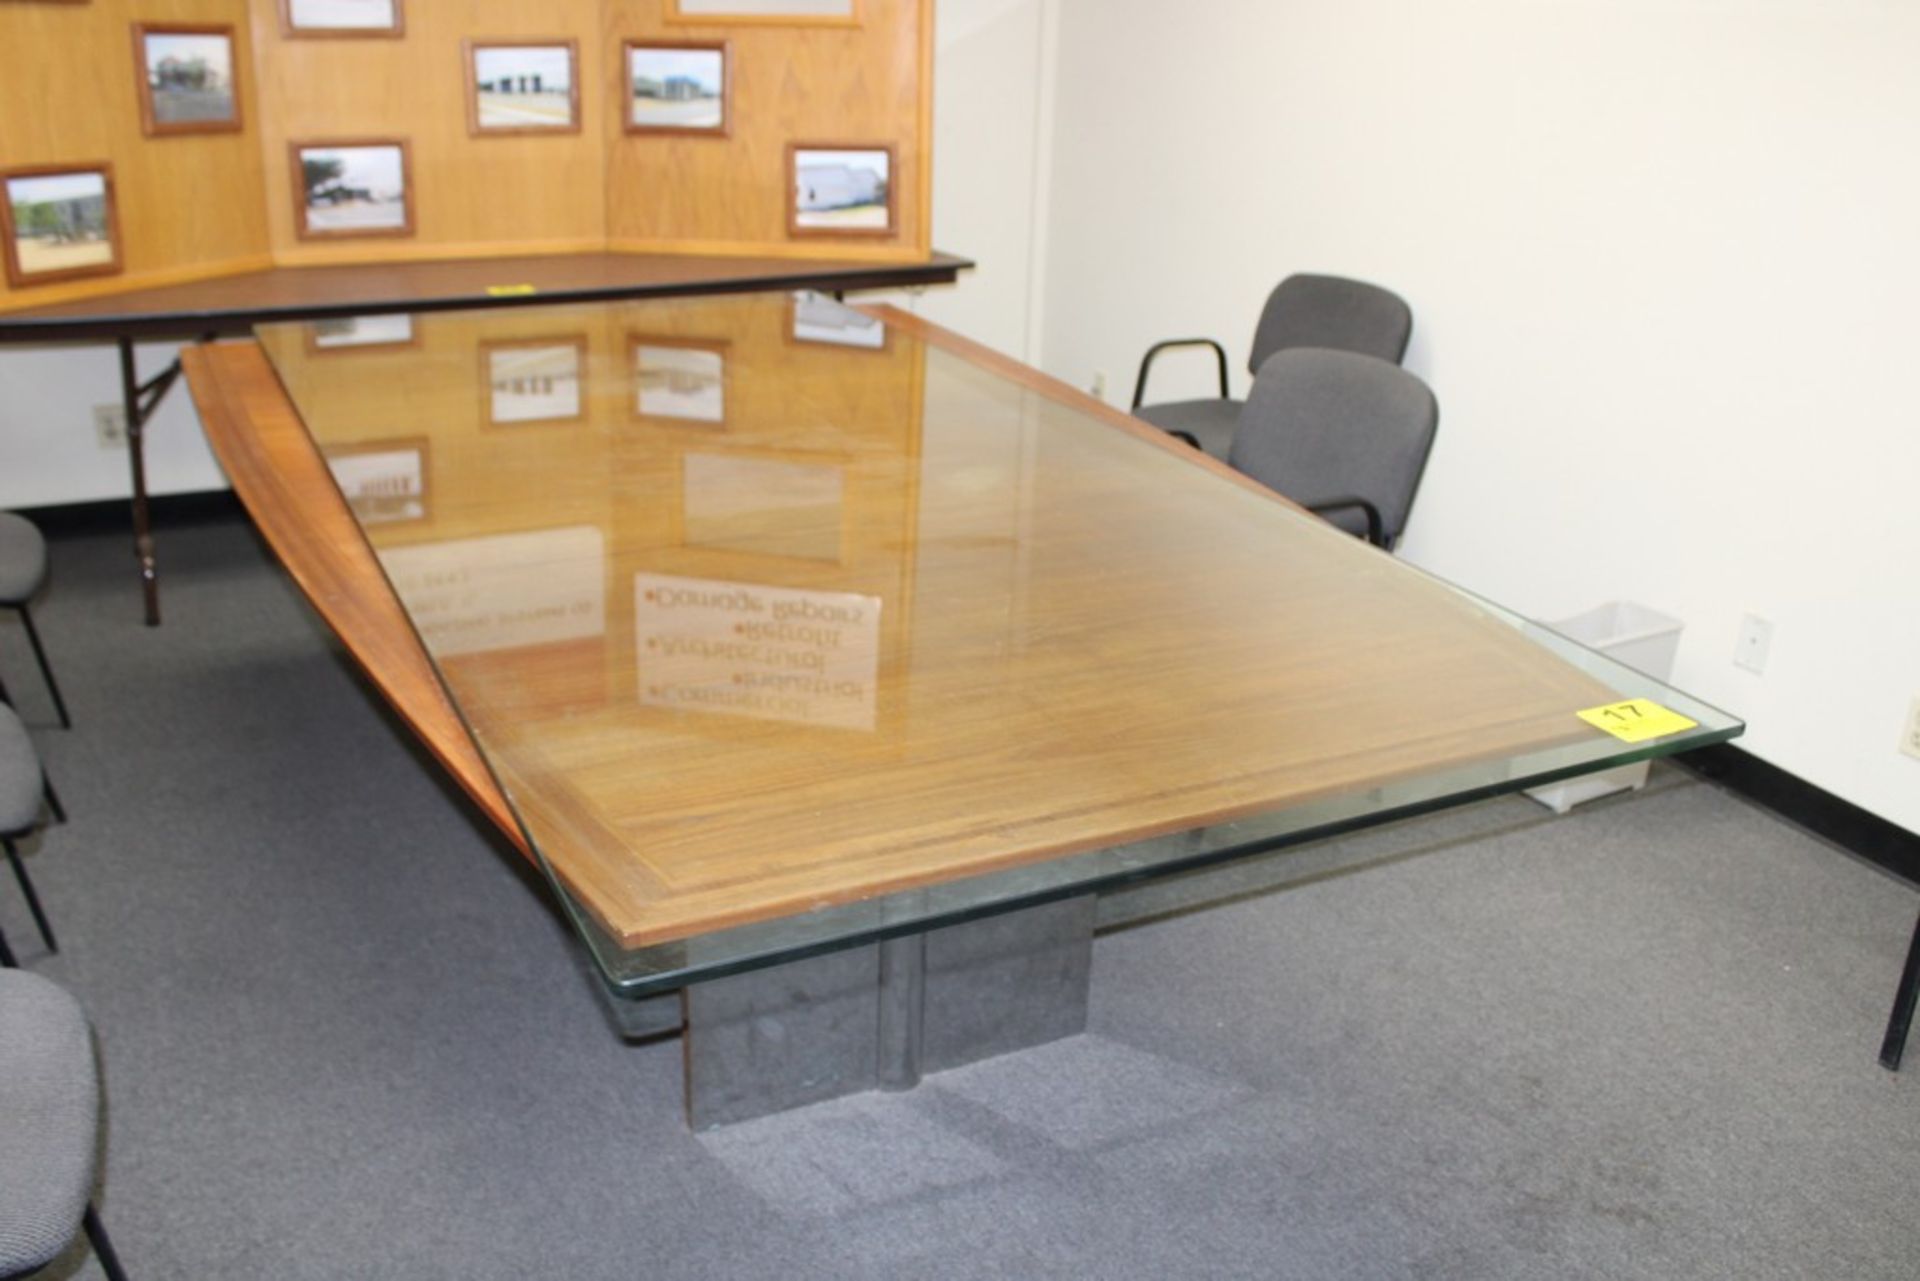 BOATAIL SYLE WOOD CONFERENCE TABLE , WITH BECKER GLASS HOCKEY PANEL TOP, 8' X 5'